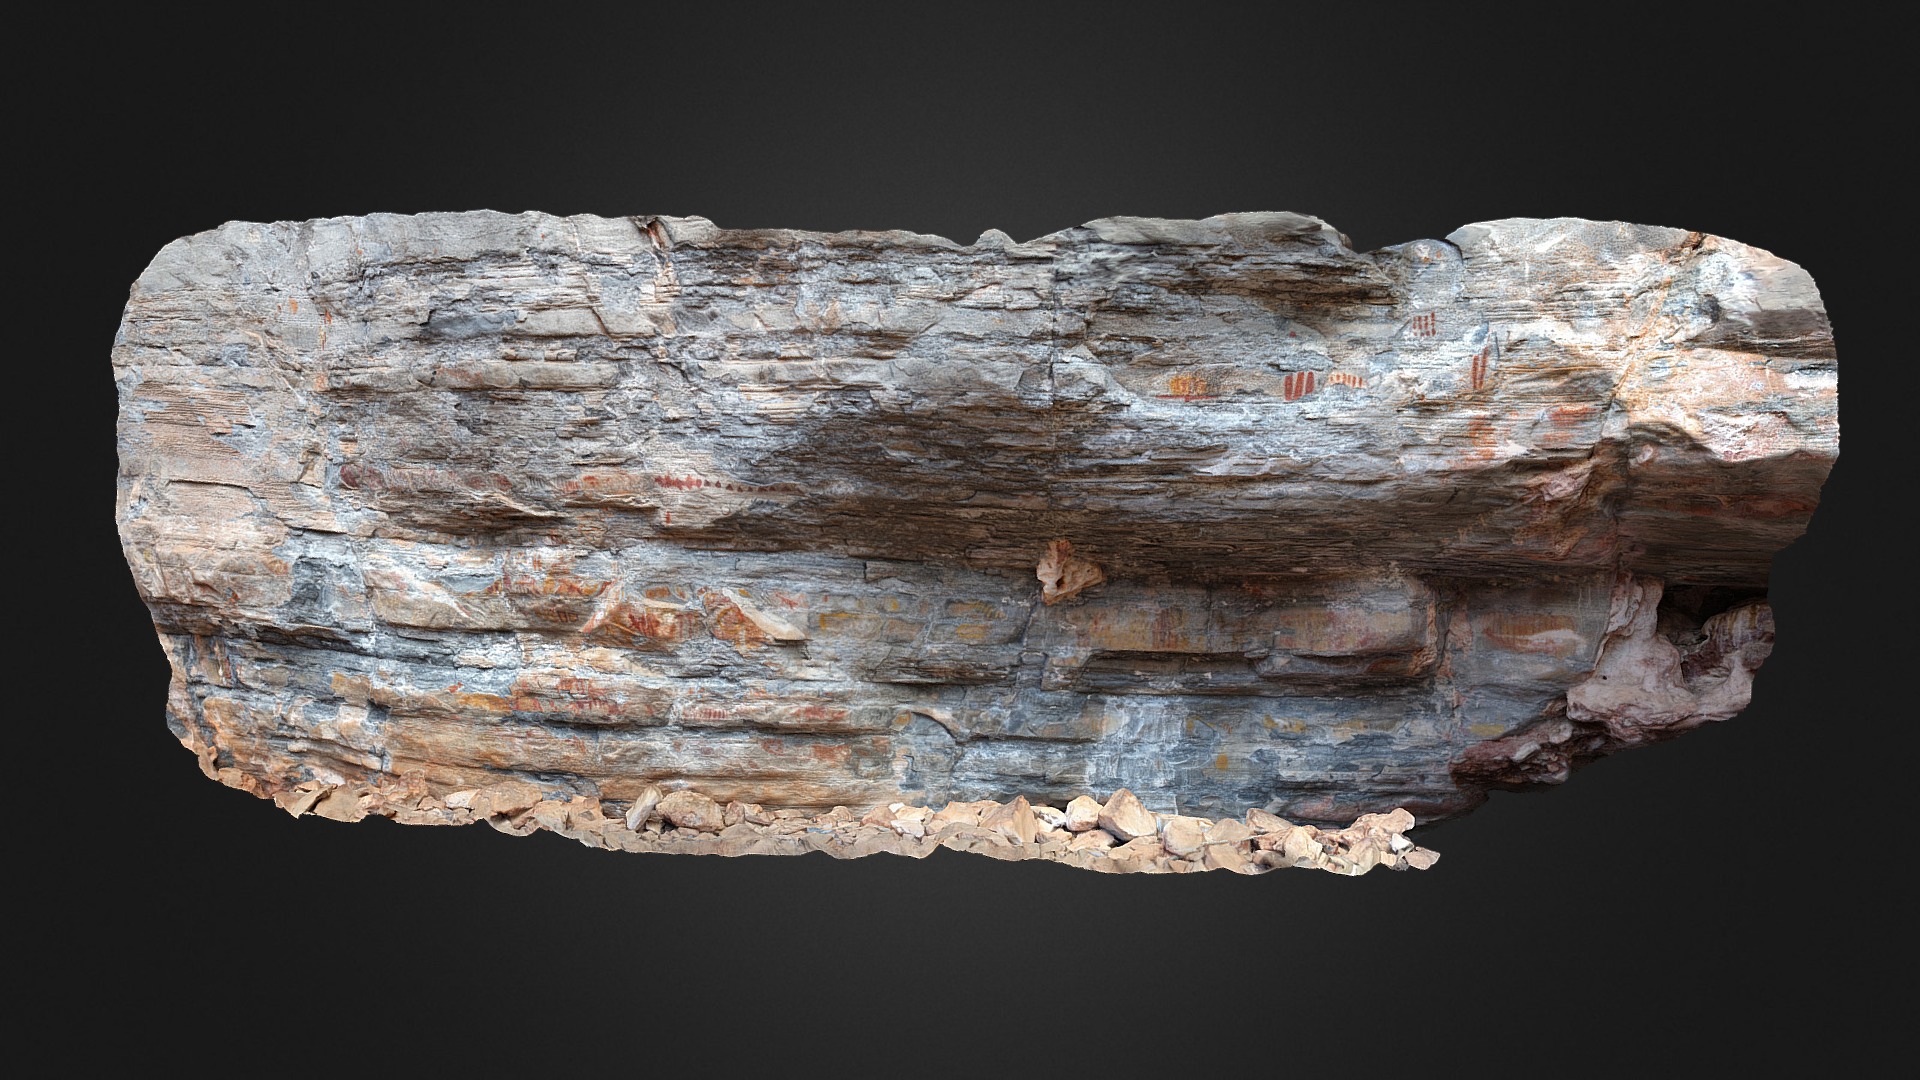 3D model Lapa Piolho de Urubu – Painel 4 - This is a 3D model of the Lapa Piolho de Urubu - Painel 4. The 3D model is about a rock with a dark background.